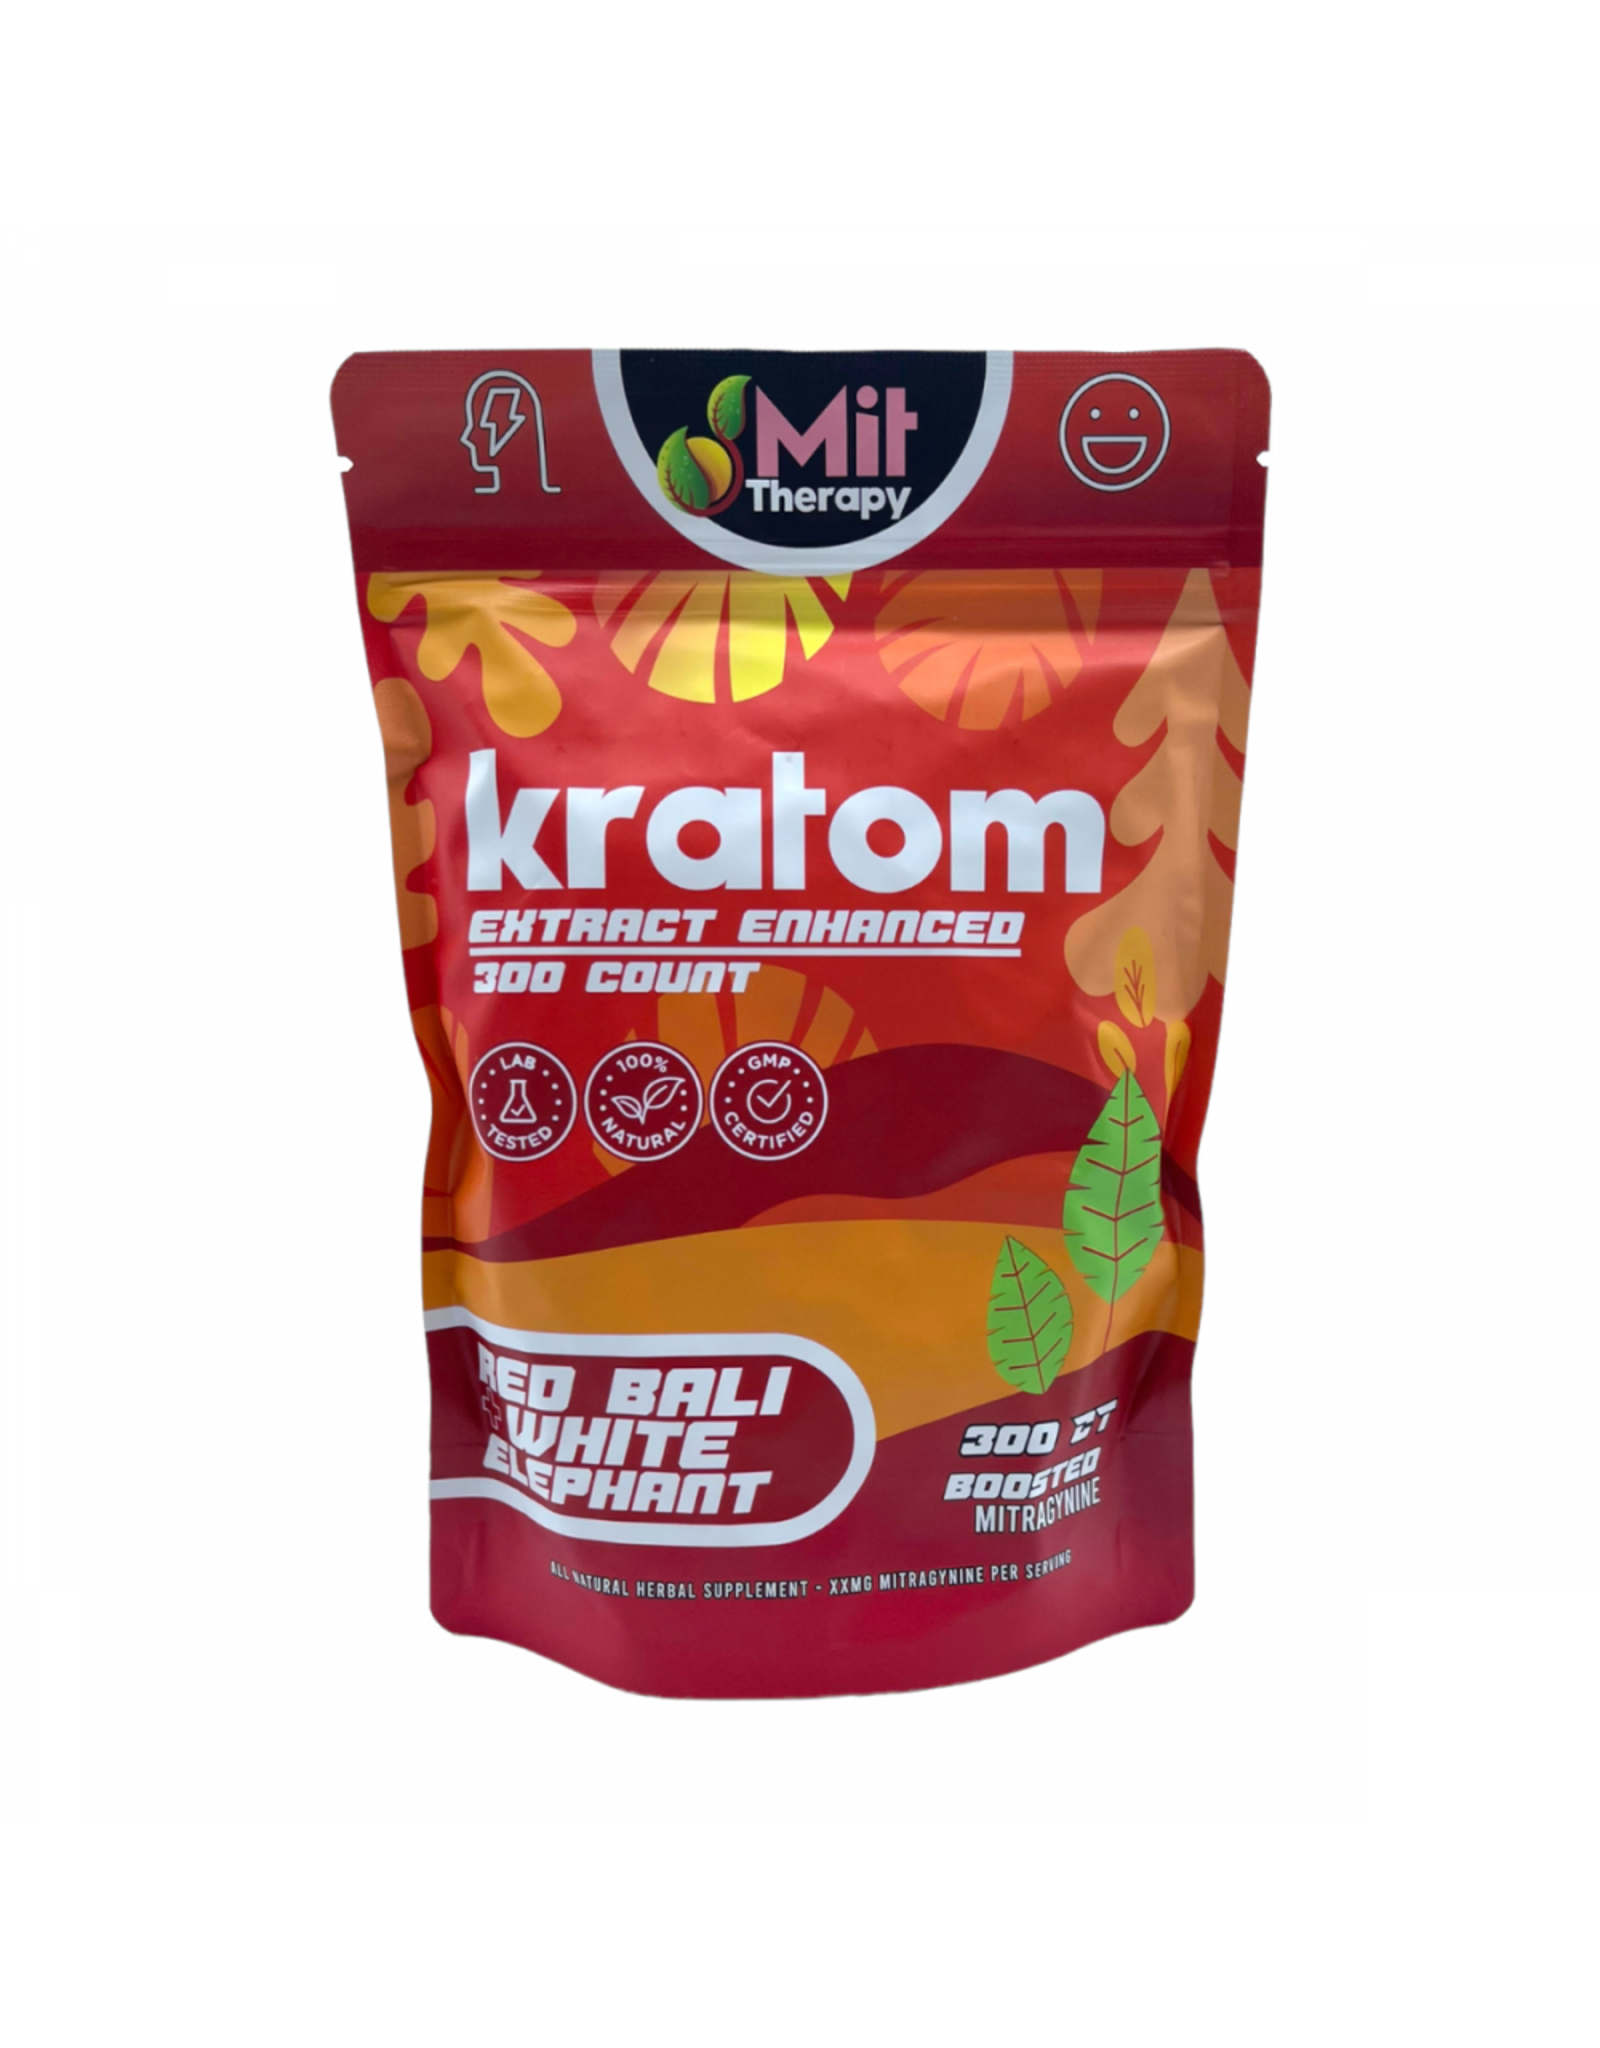 MIT Therapy MIT Therapy Kratom Red Bali + White Elephant 10ct